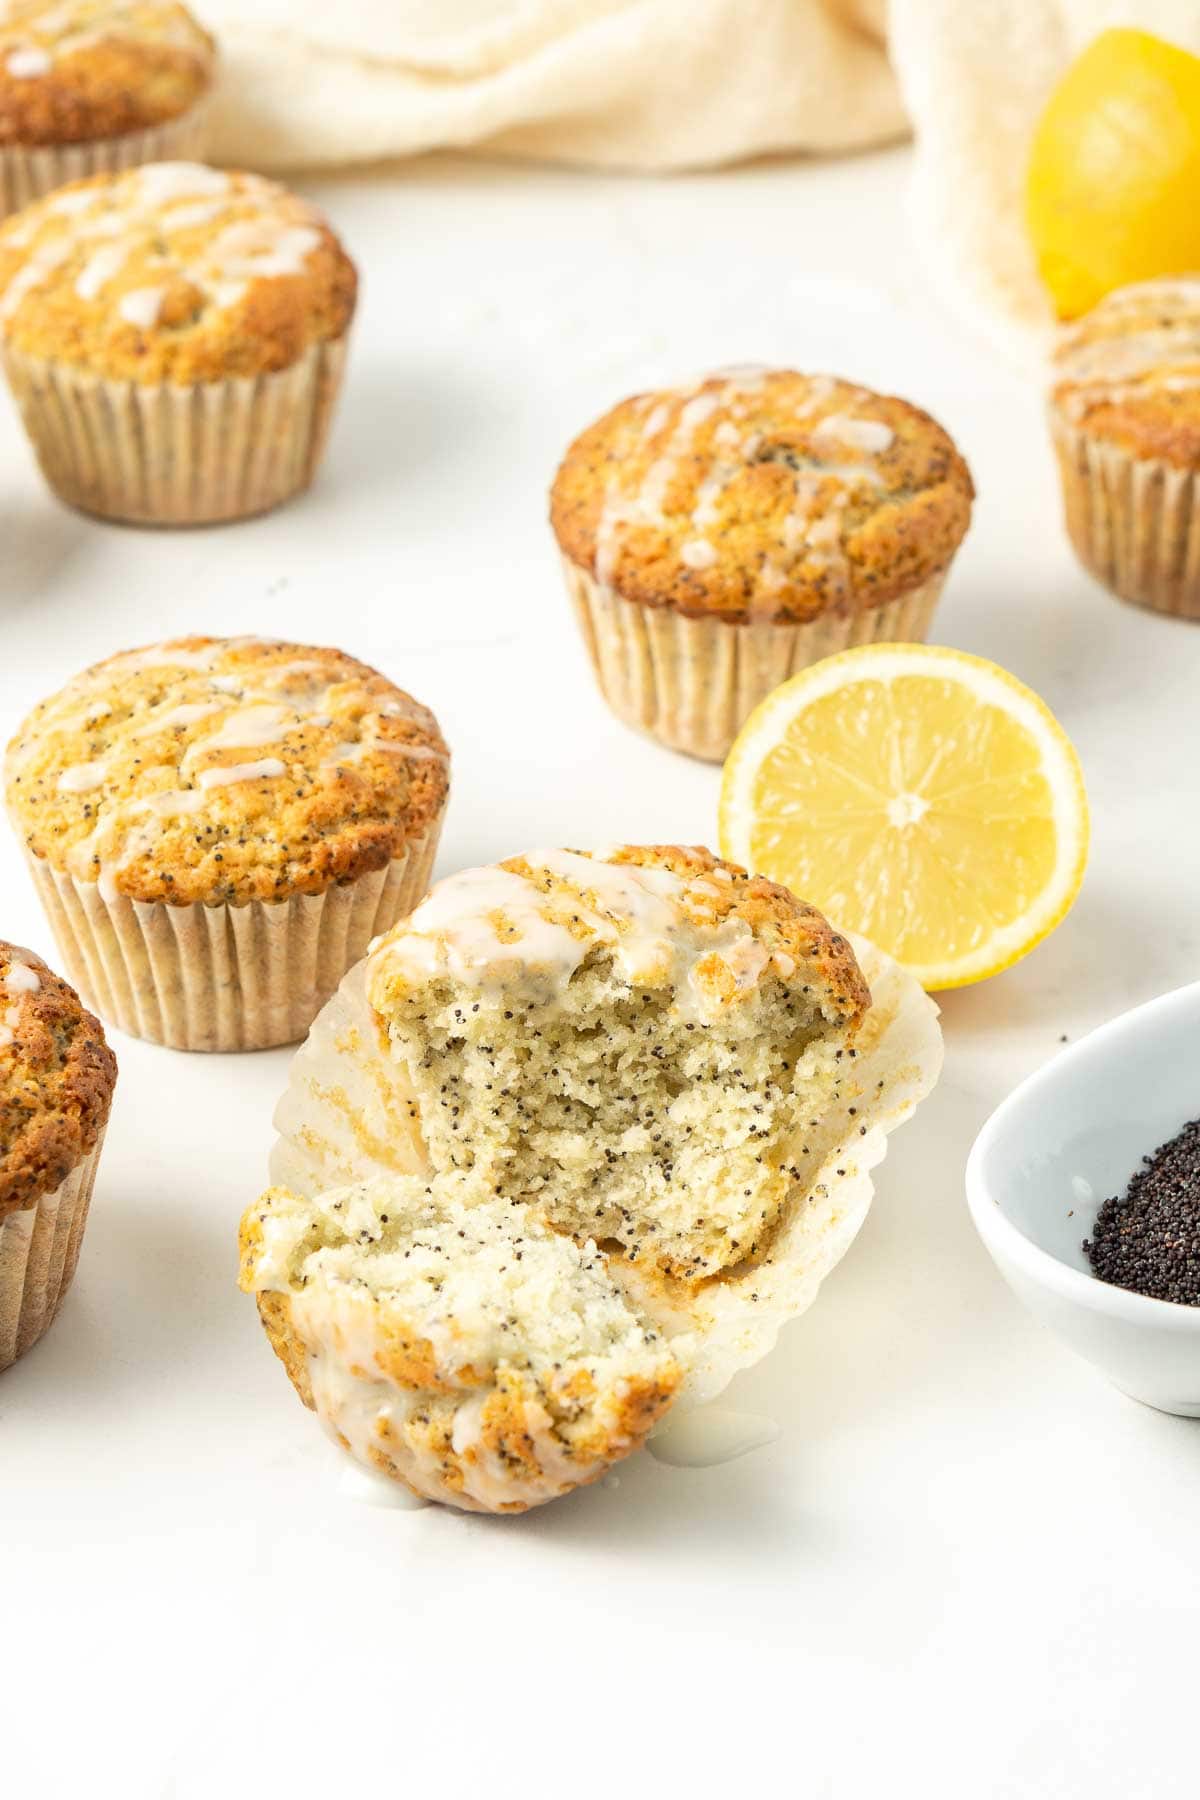 Lemon poppy seed muffins with a bite taken.